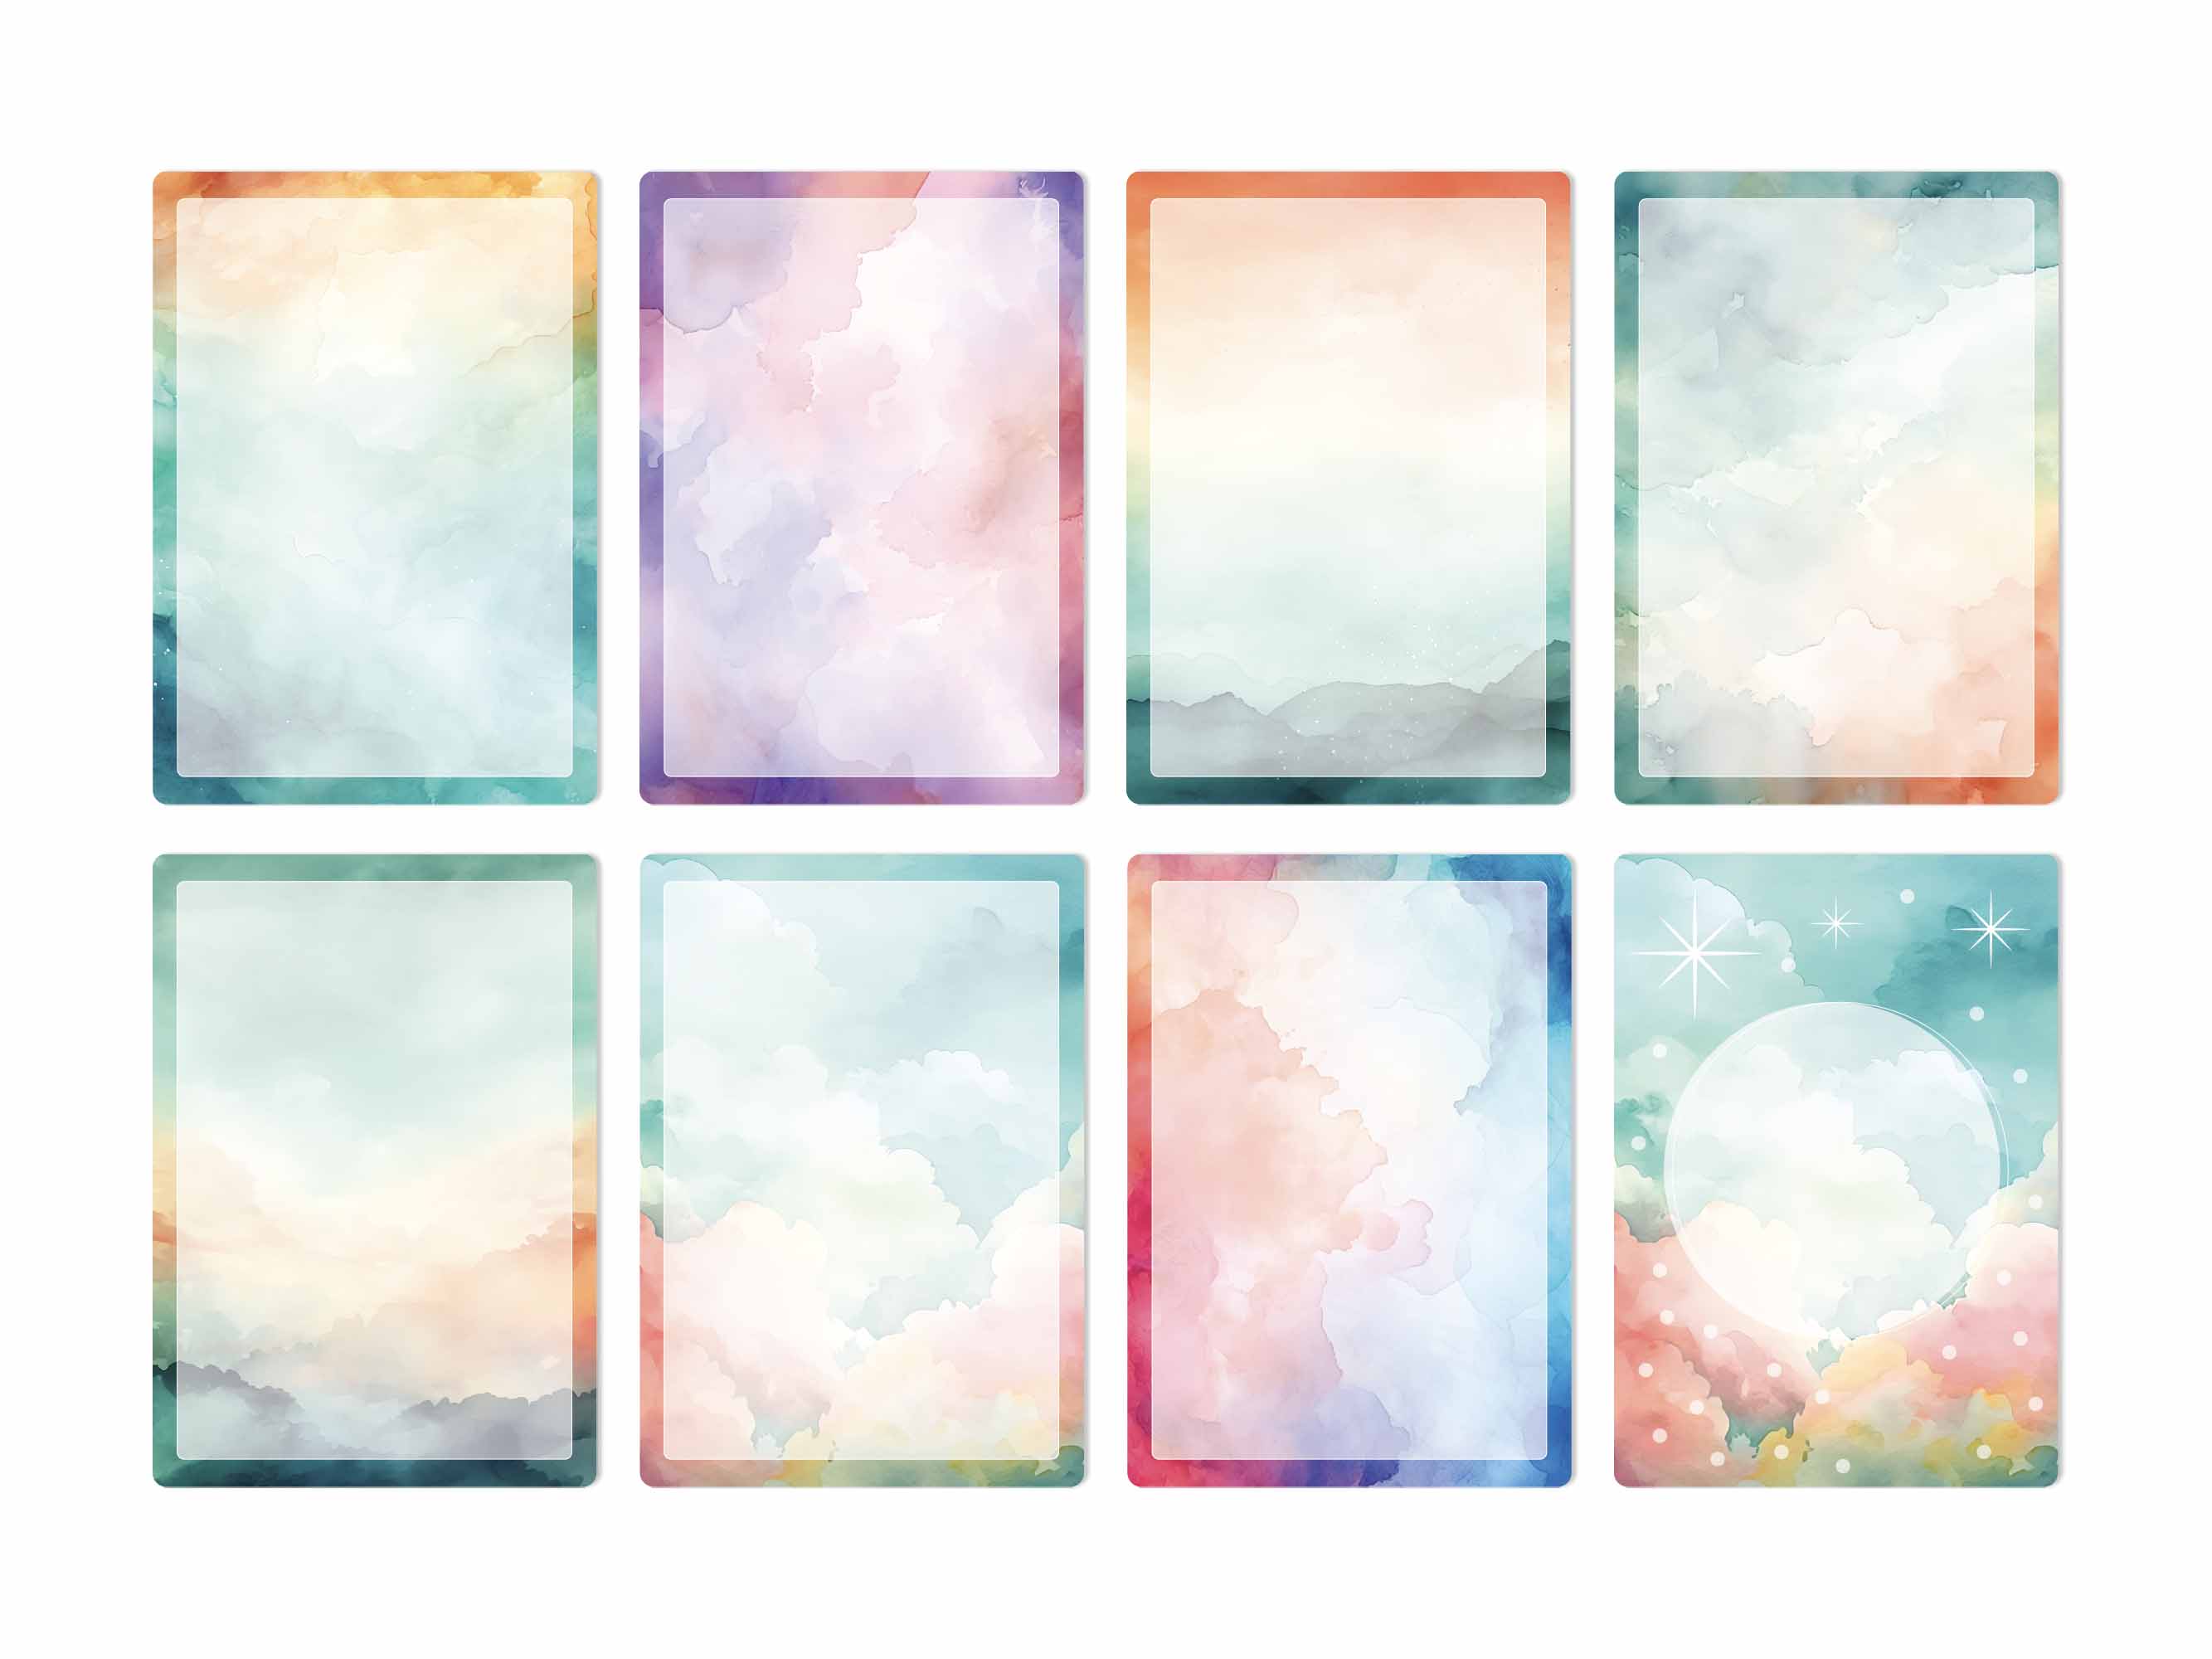 16 printable blank watercolor affirmation cards